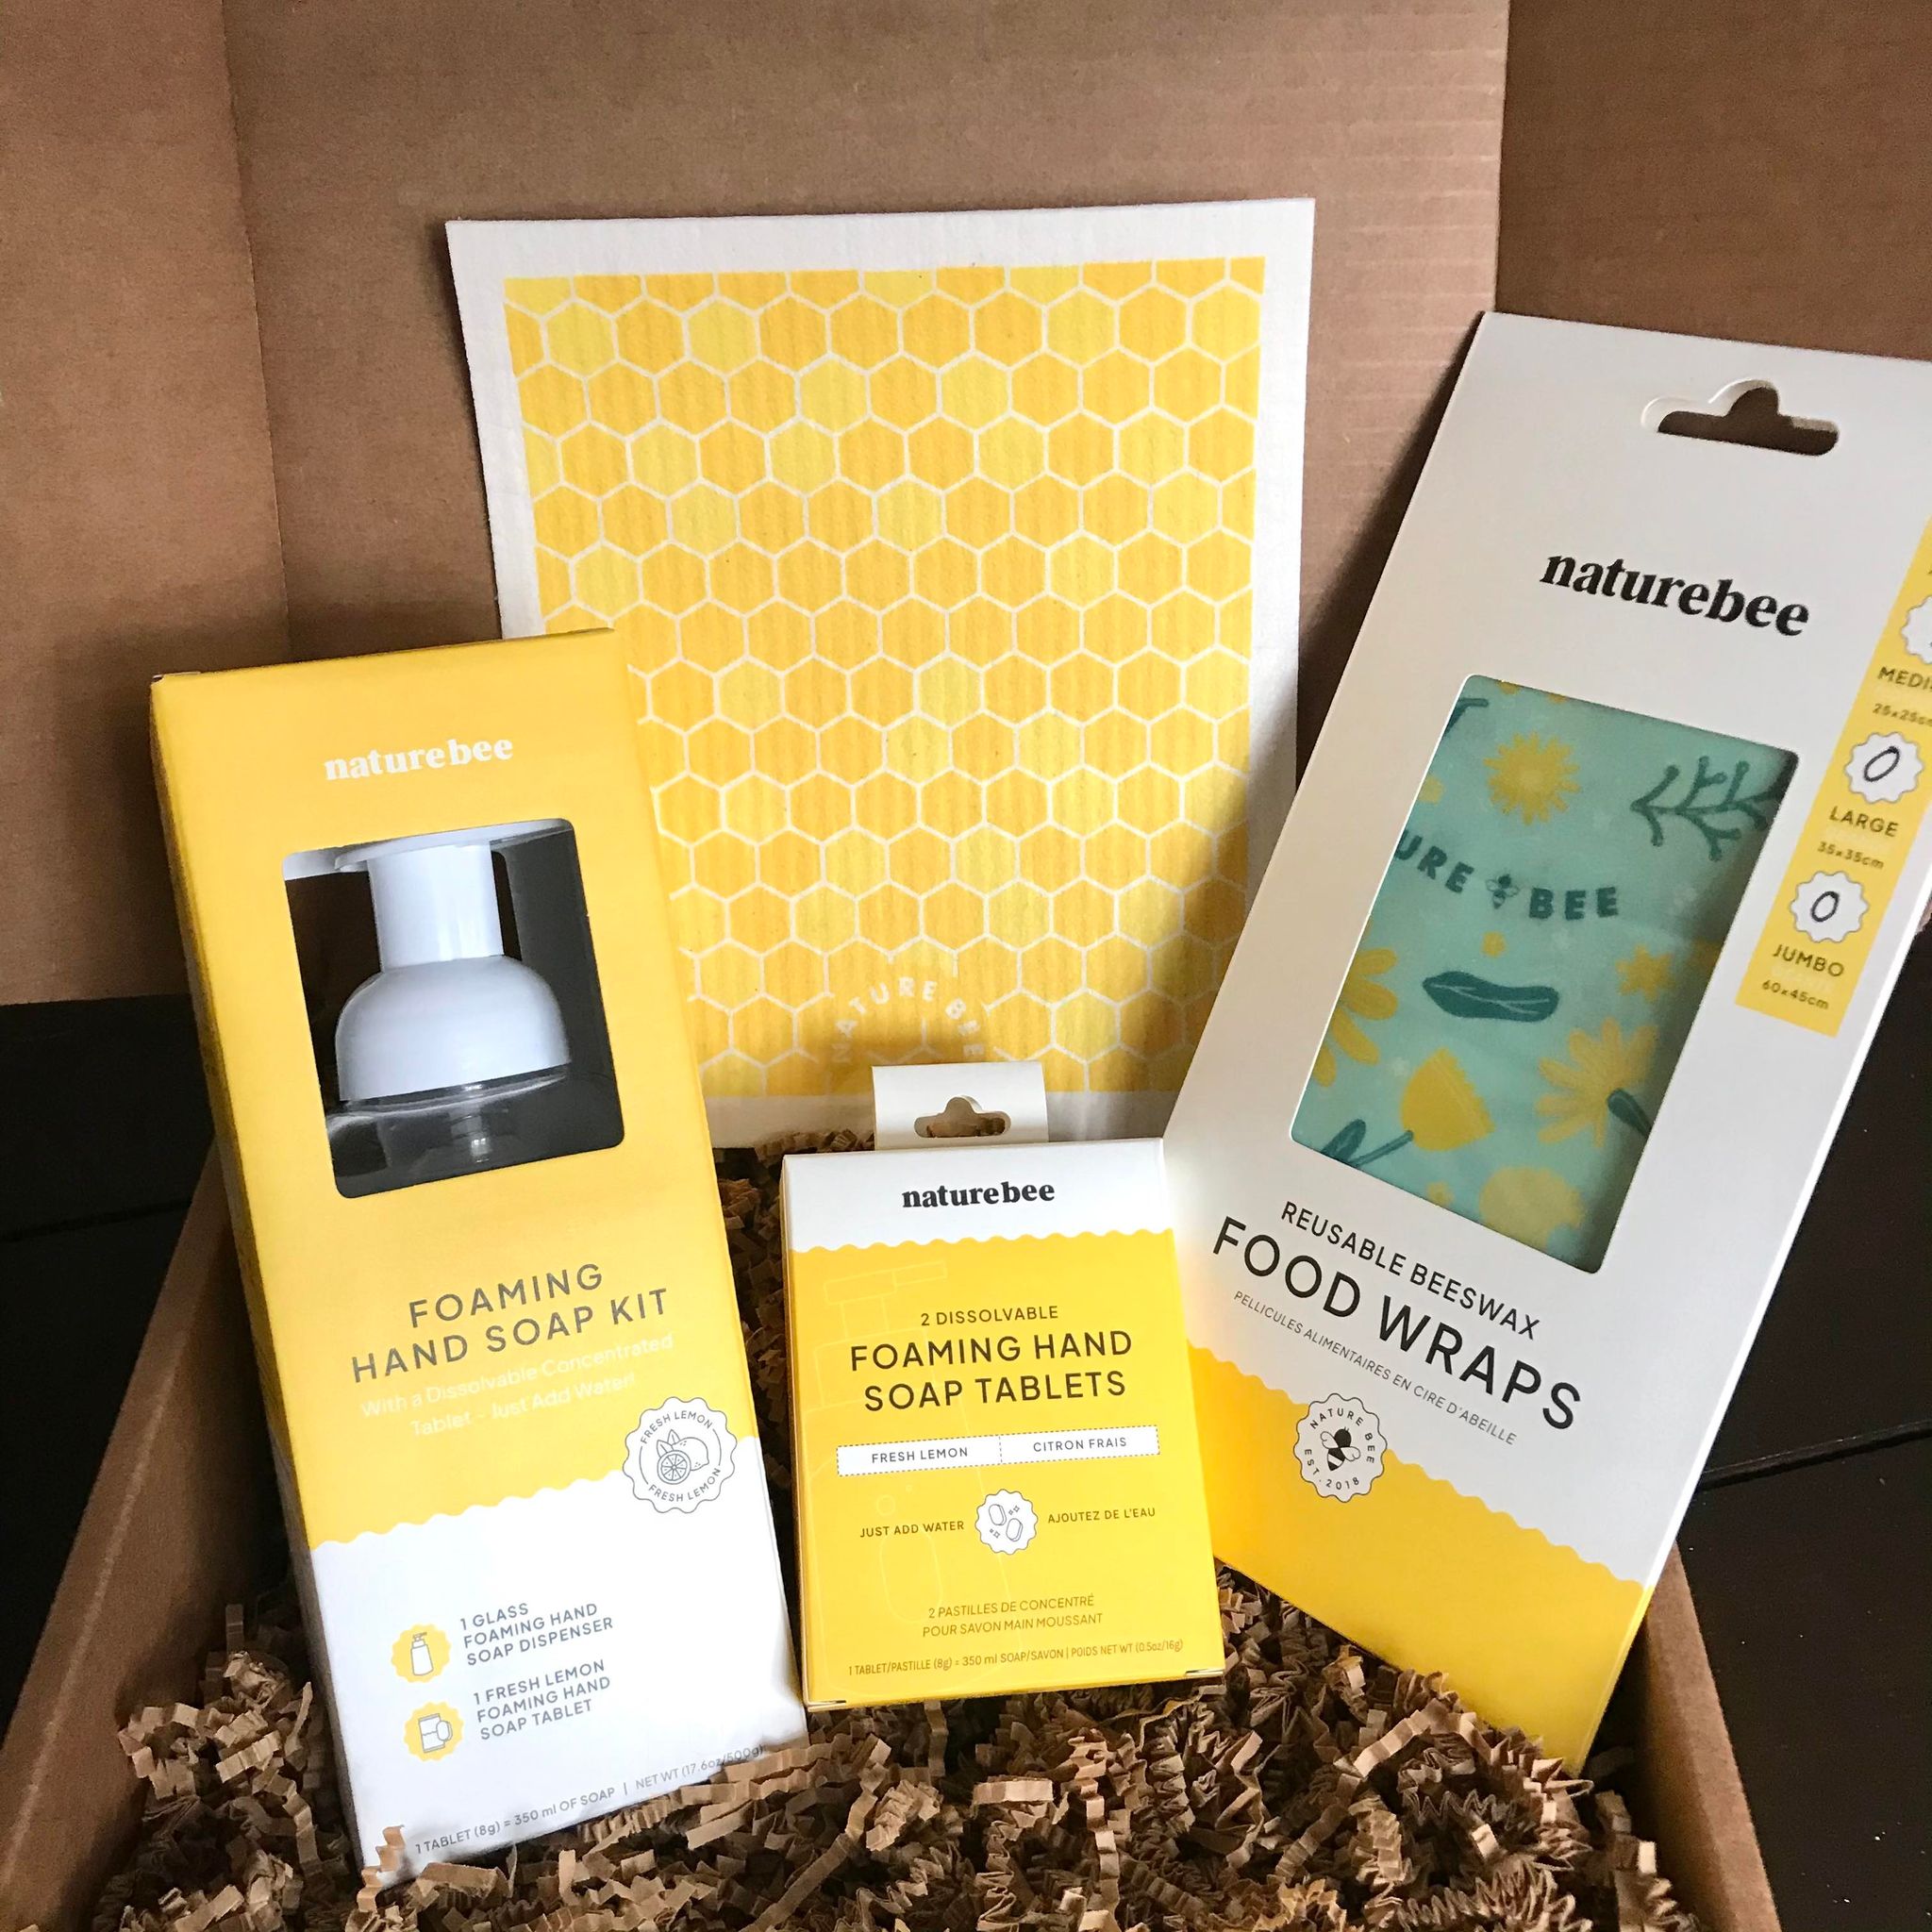 Included in this zero waste kitchen set is Swedish sponge cloth in a honeycomb pattern, a fresh lemon foaming hand soap kit, a set of two fresh lemon foaming hand soap tablets and a large green 'bee lovers' beeswax wrap.